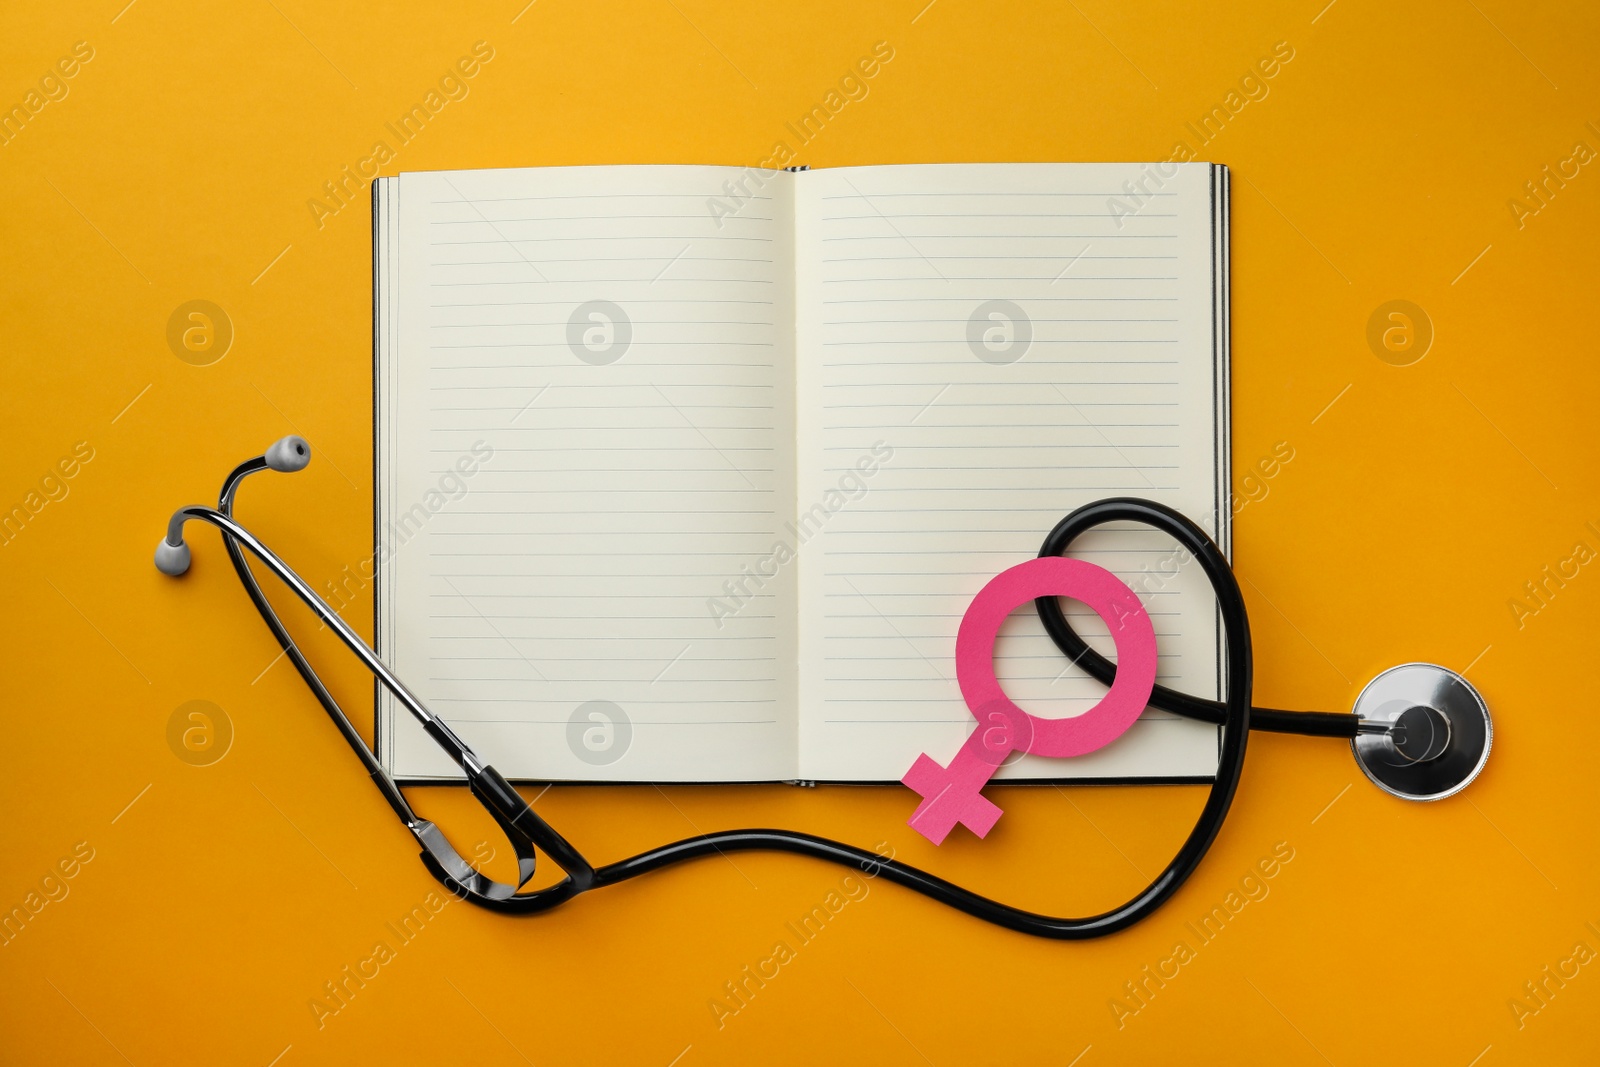 Photo of Female gender sign, open notebook and stethoscope on orange background, flat lay. Women's health concept